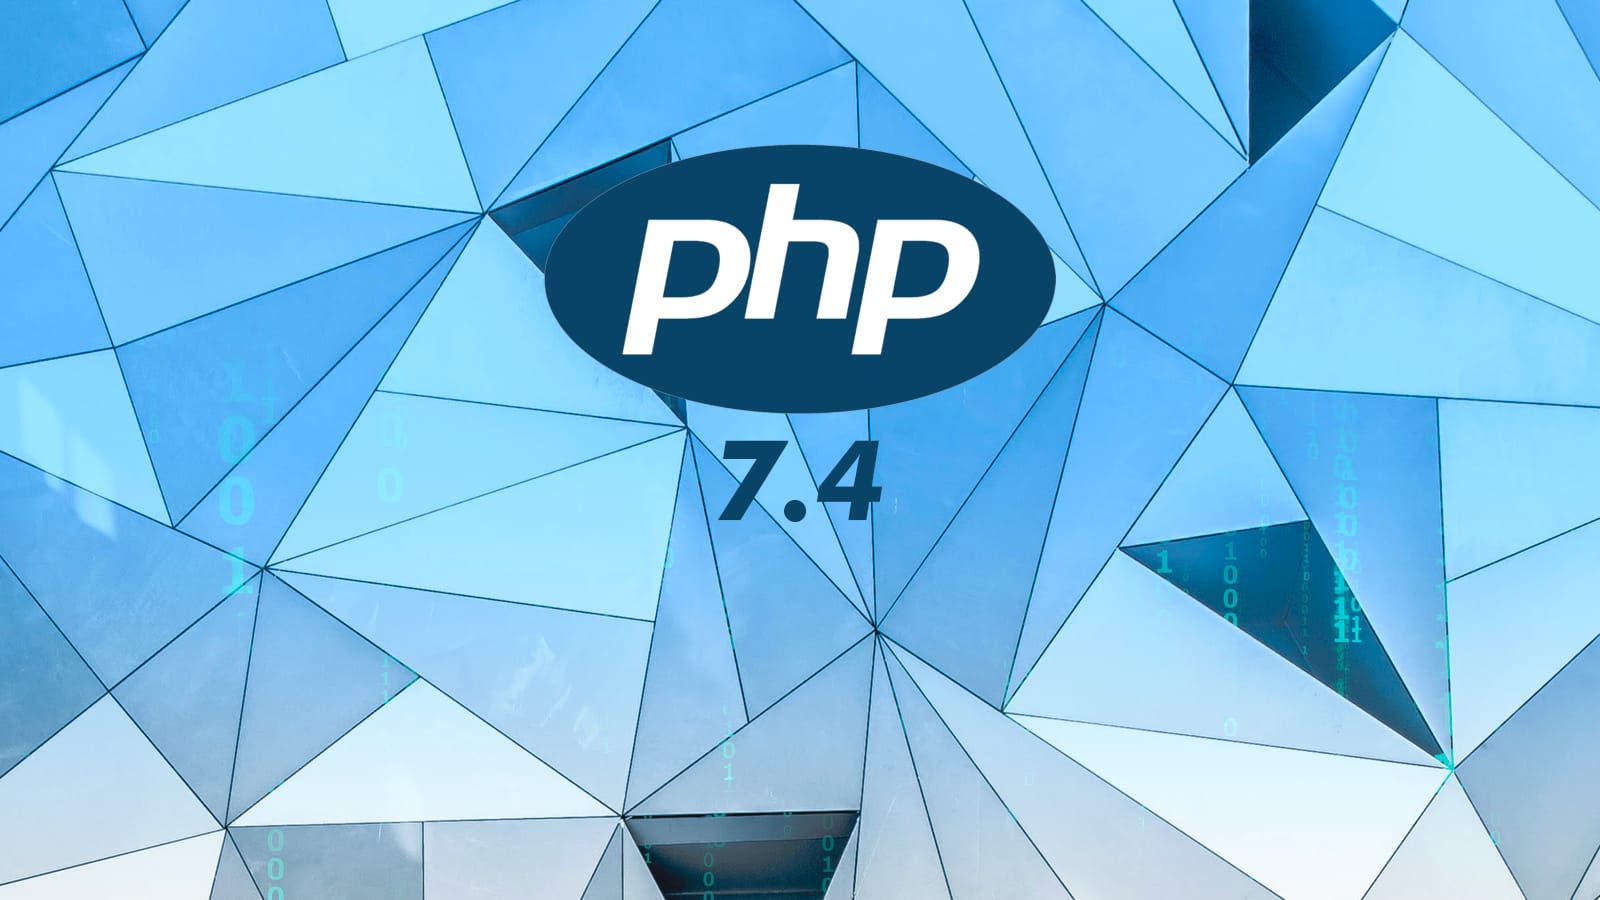 What's new in PHP 7.4